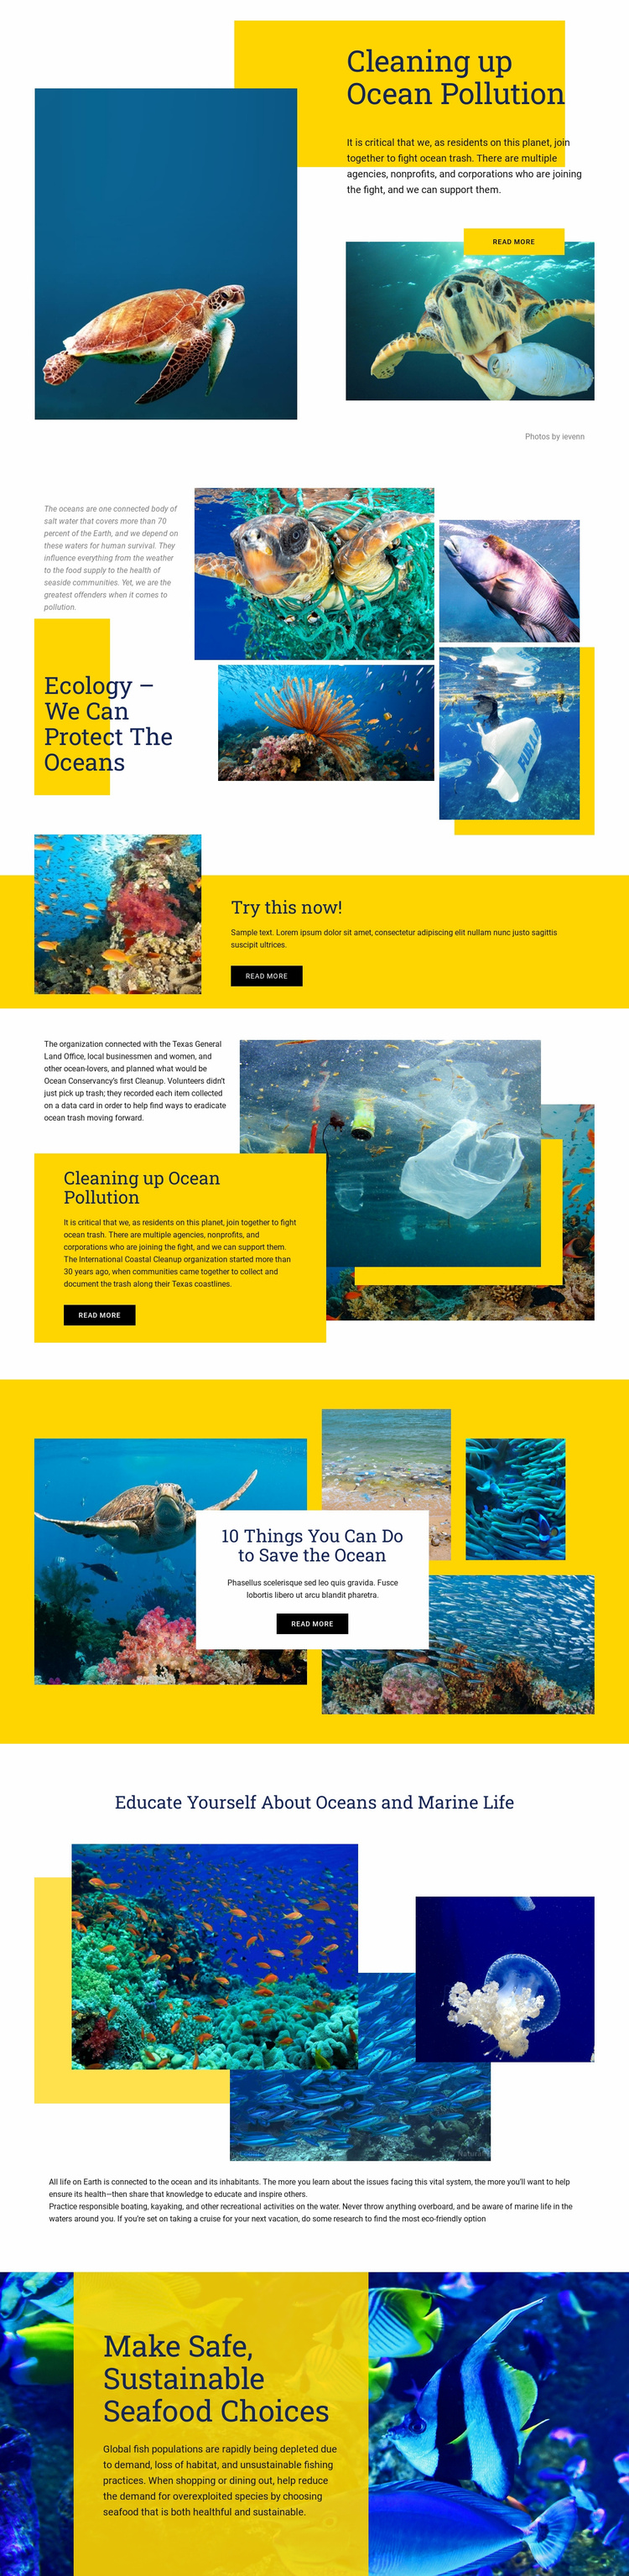 Protect The Oceans Website Template